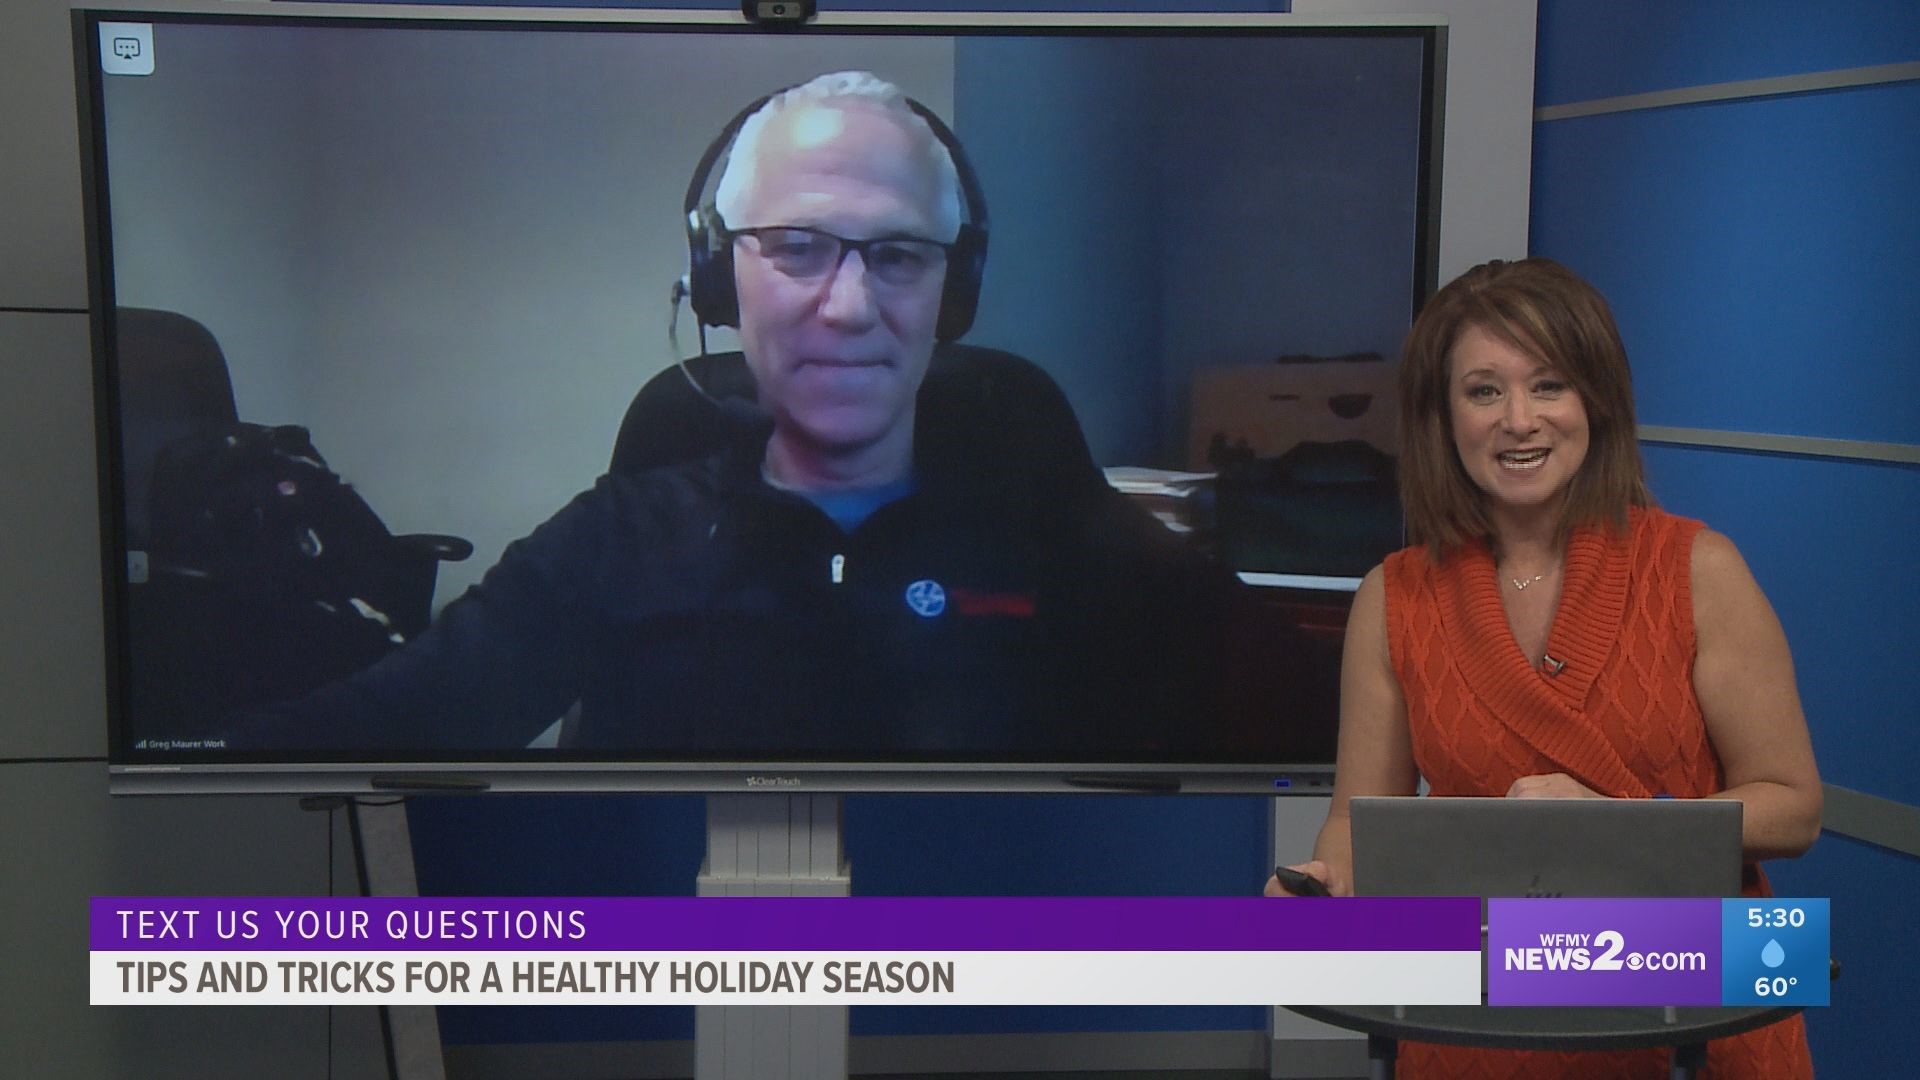 Greg Maurer, the vice president of fitness and education for Workout Anytime, shares tips to stay healthy during the holidays.